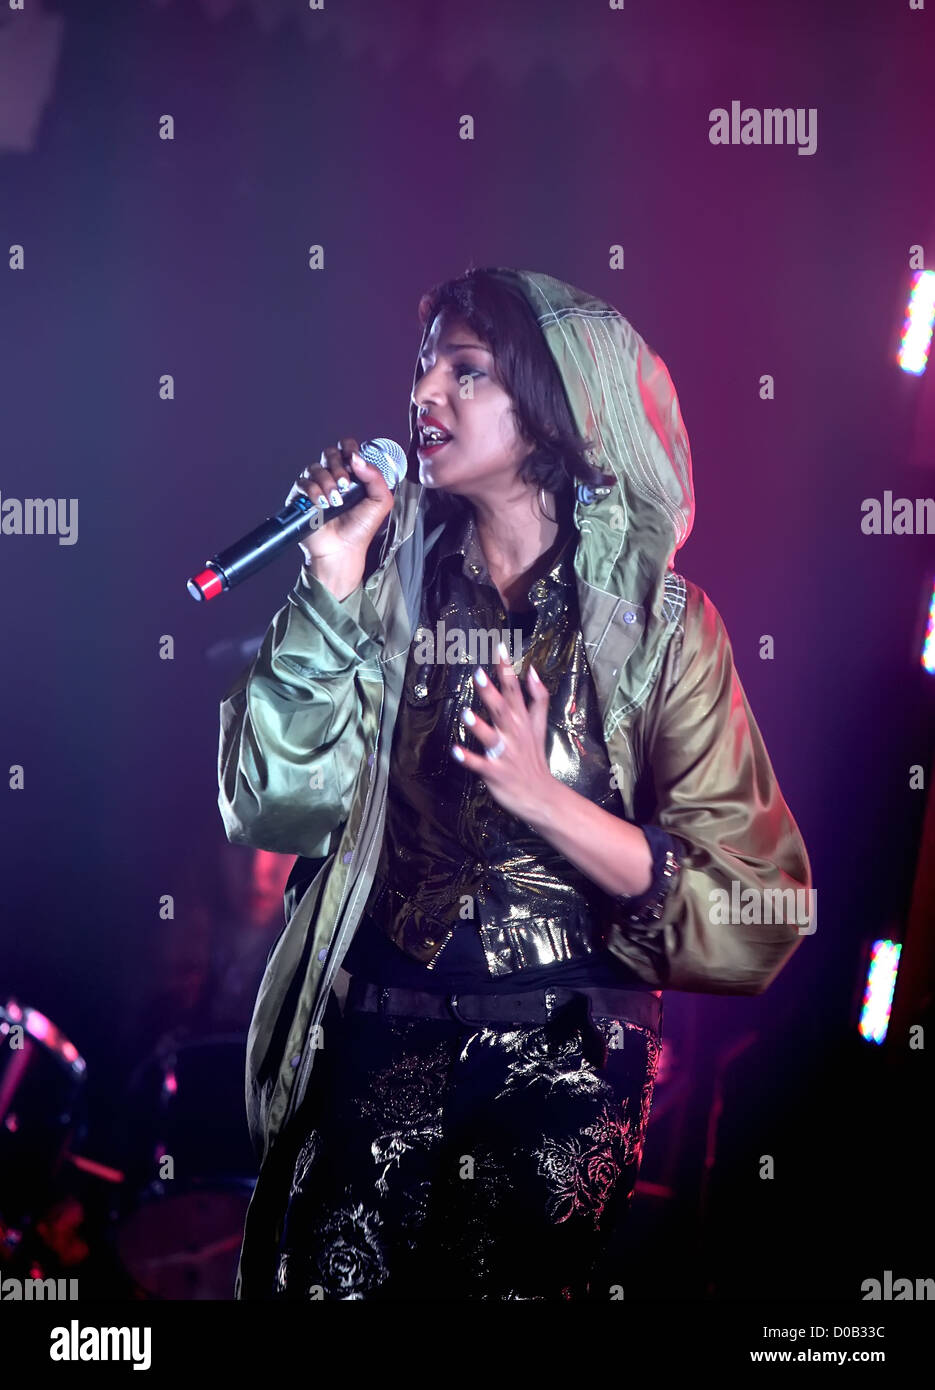 M.I.A. performs live at Paradiso Amsterdam, The Netherlands - 25.11.10 Stock Photo